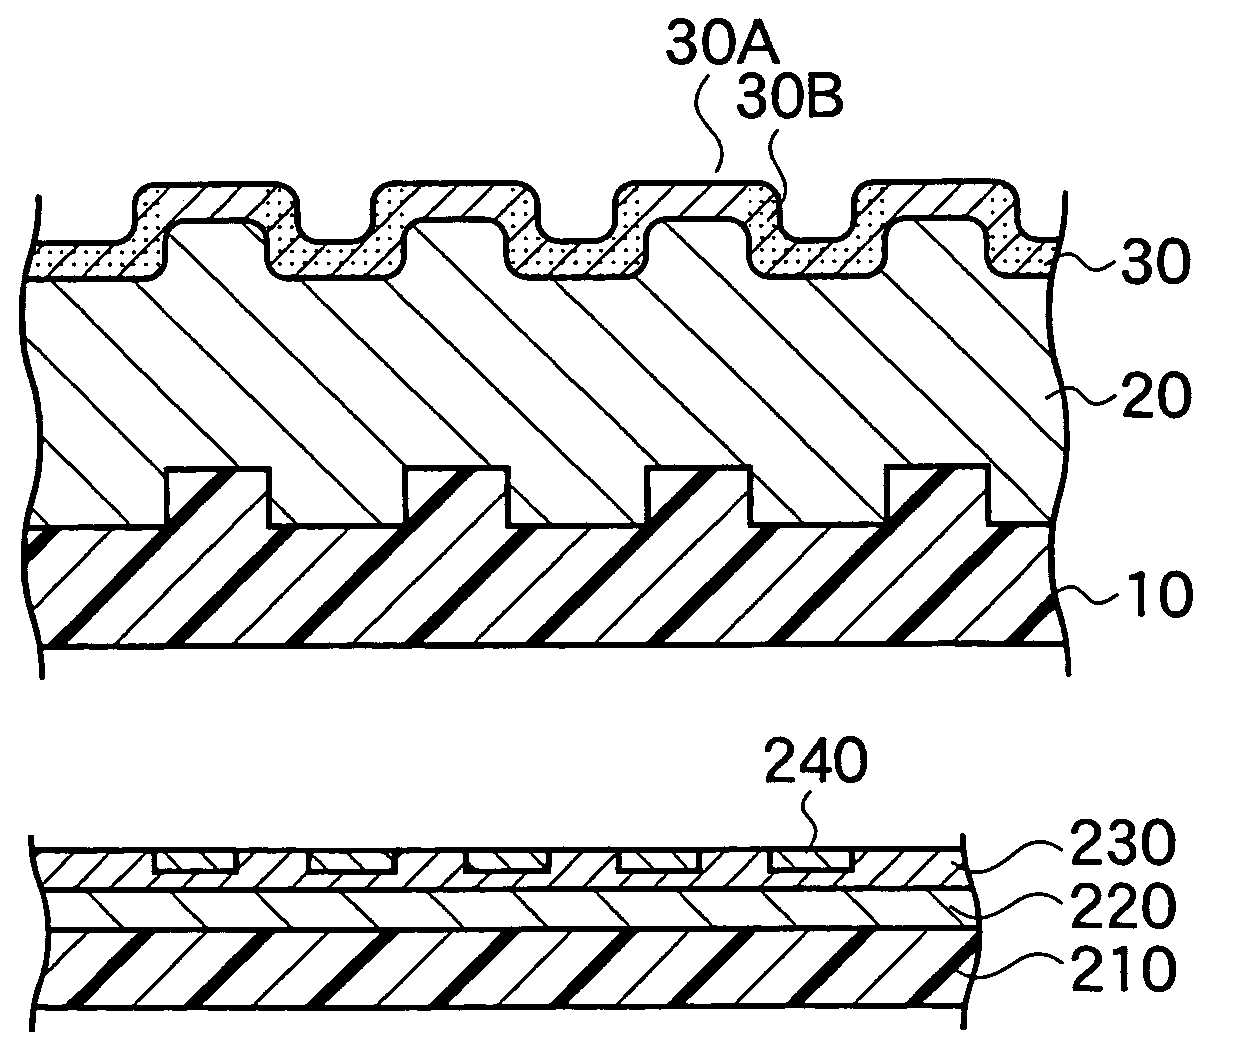 Magnetic recording medium having a patterned soft magnetic layer